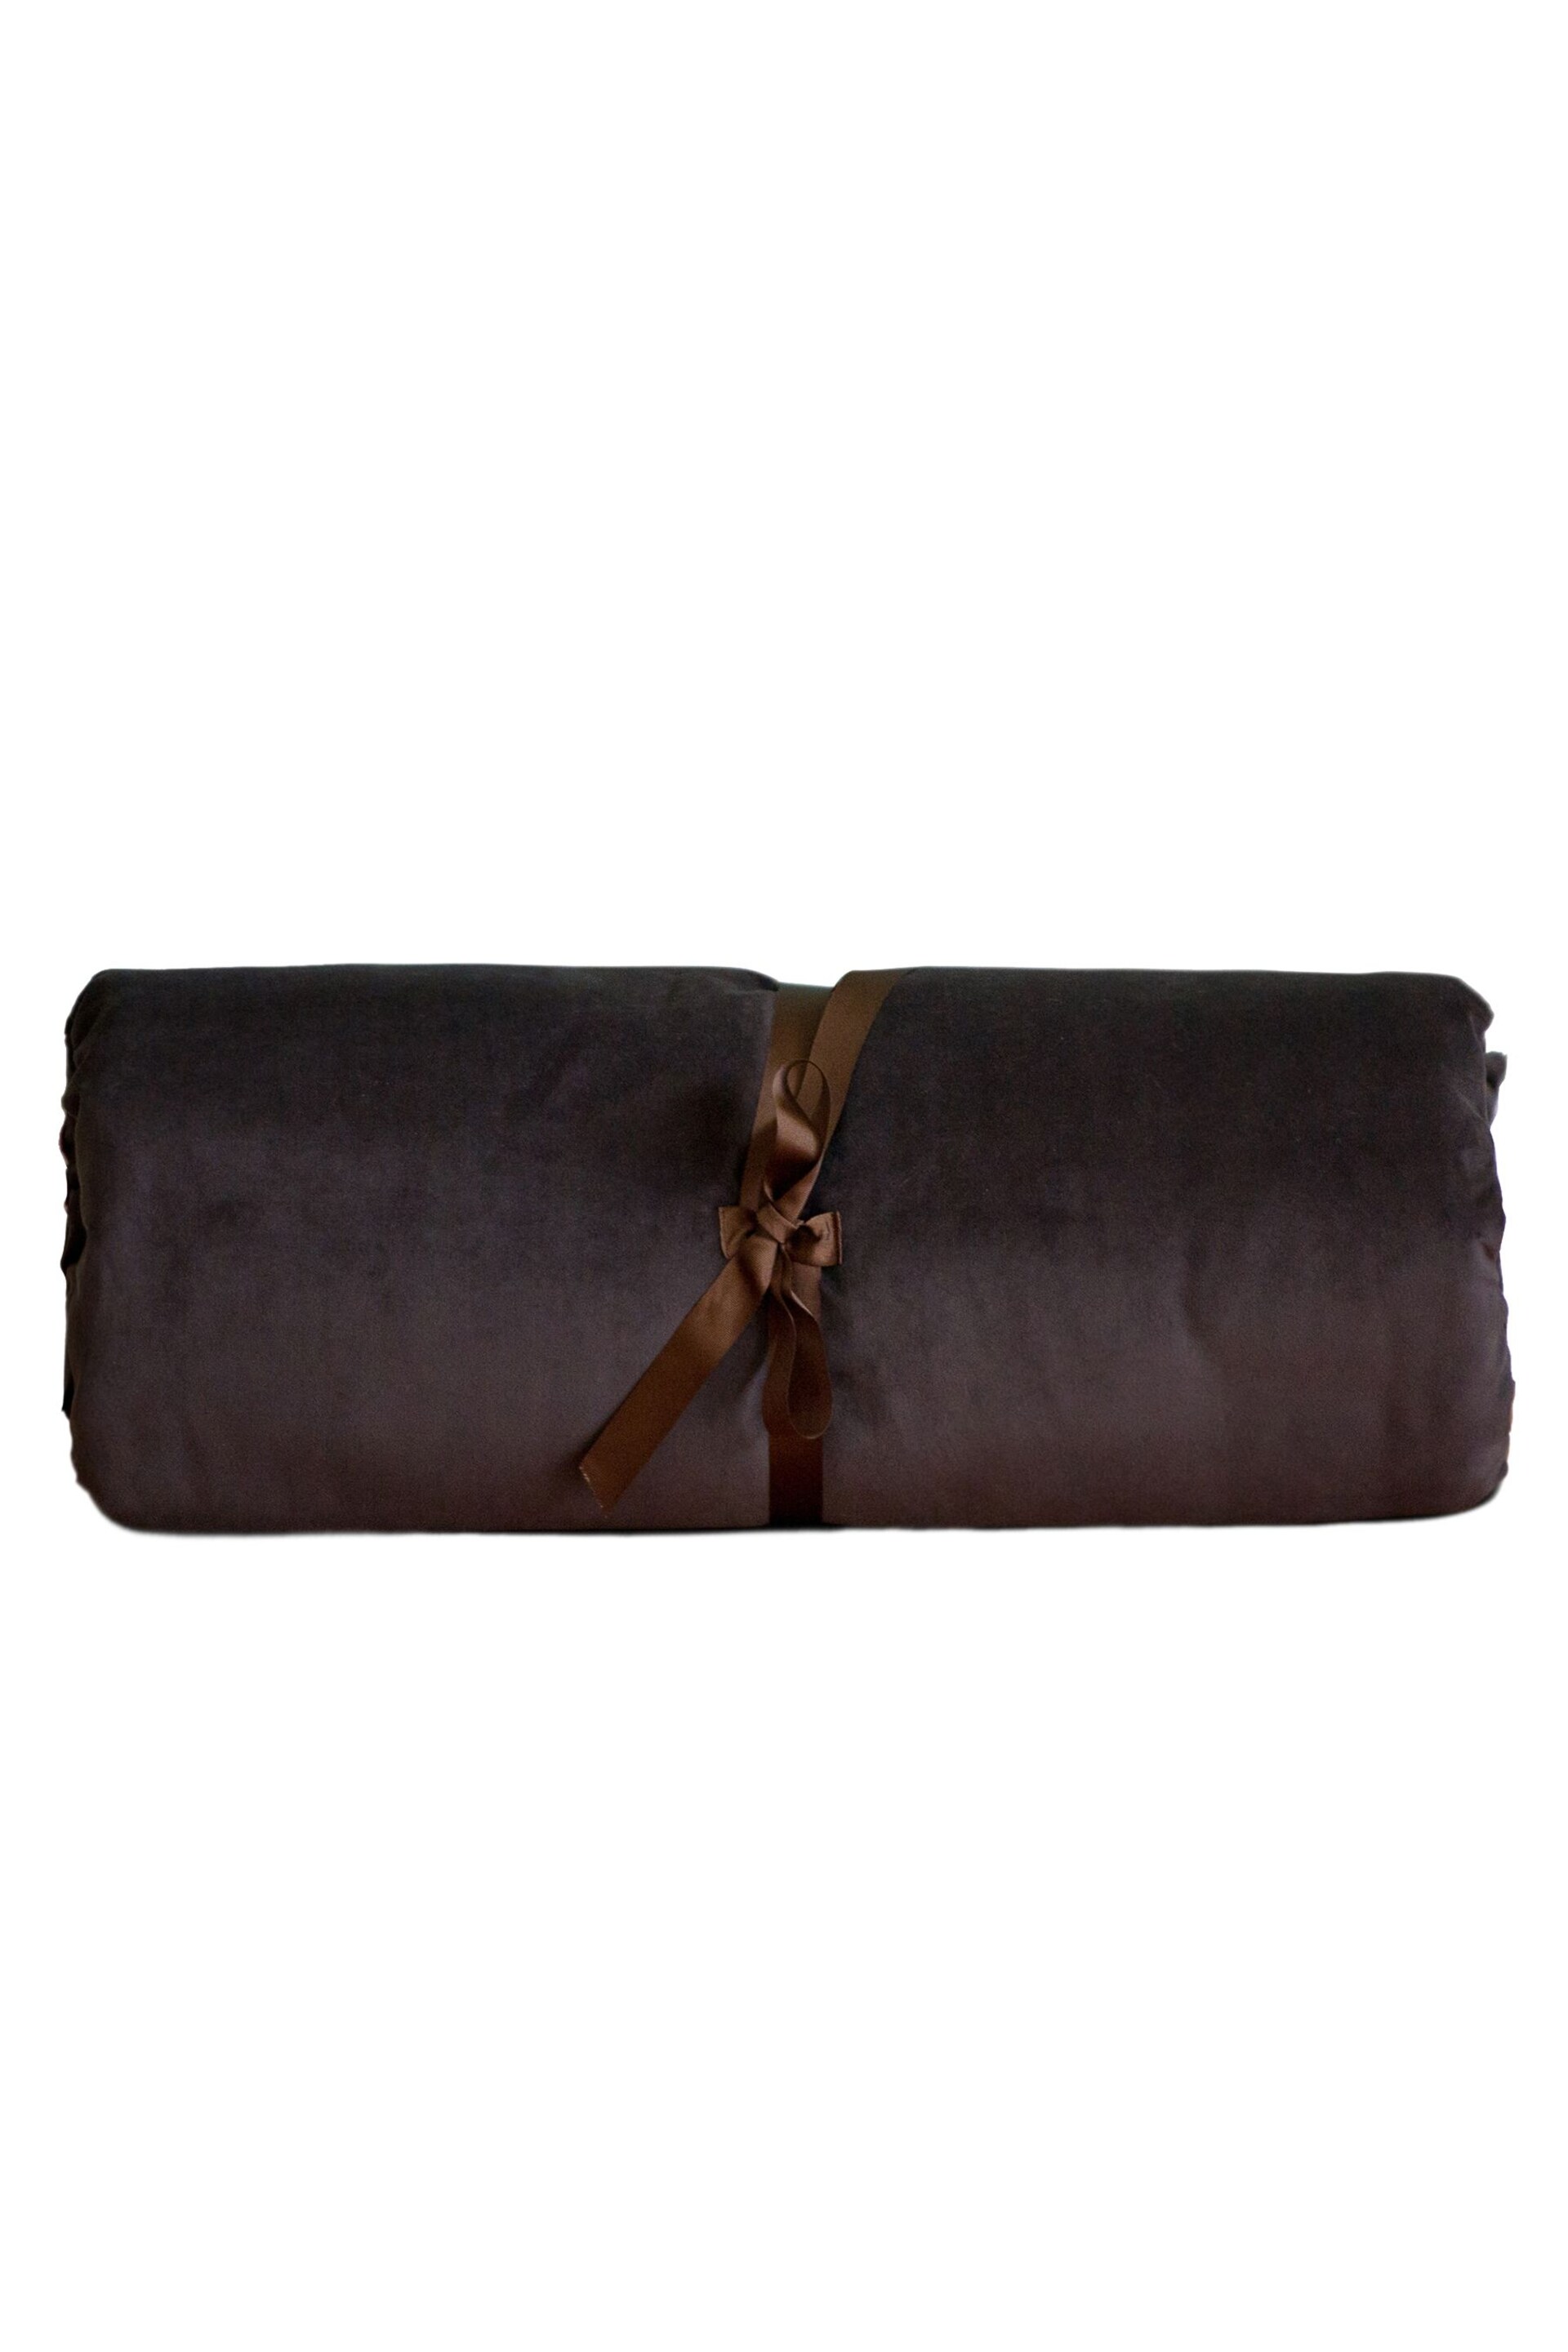 Lounging Hound Brown Travel Bed Roll in Mole Plush Velvet - Image 3 of 4